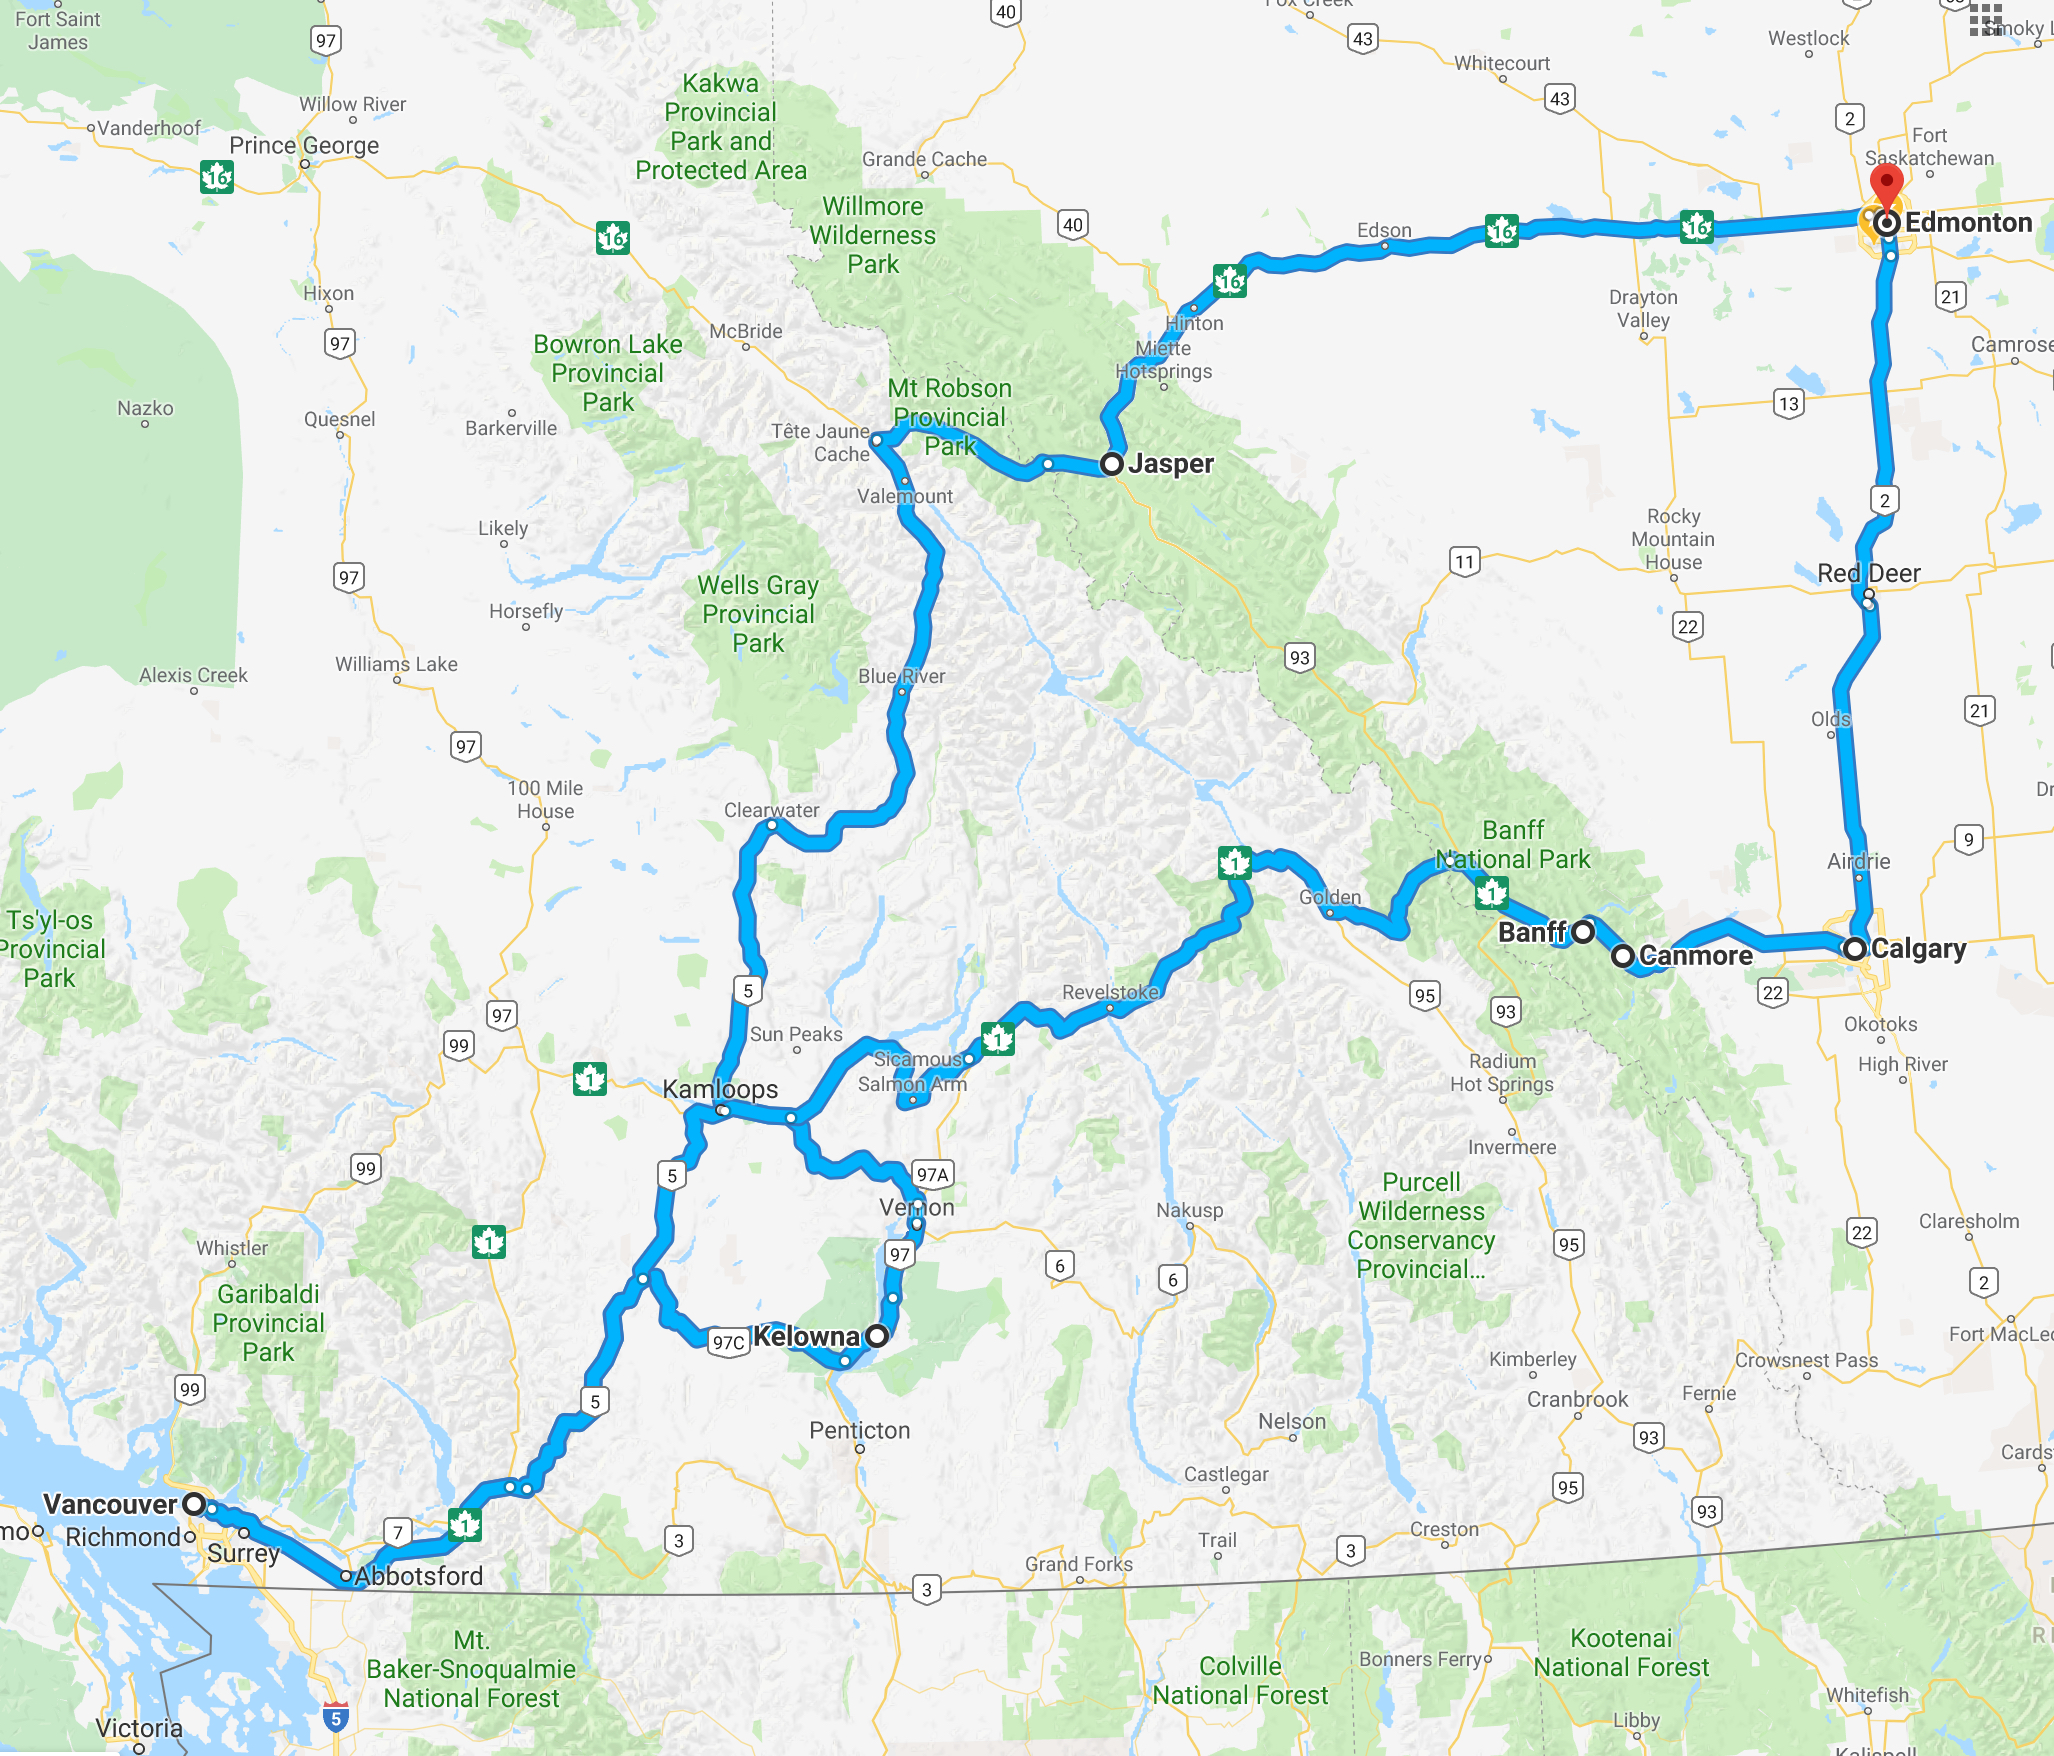 how long to drive from vancouver to edmonton